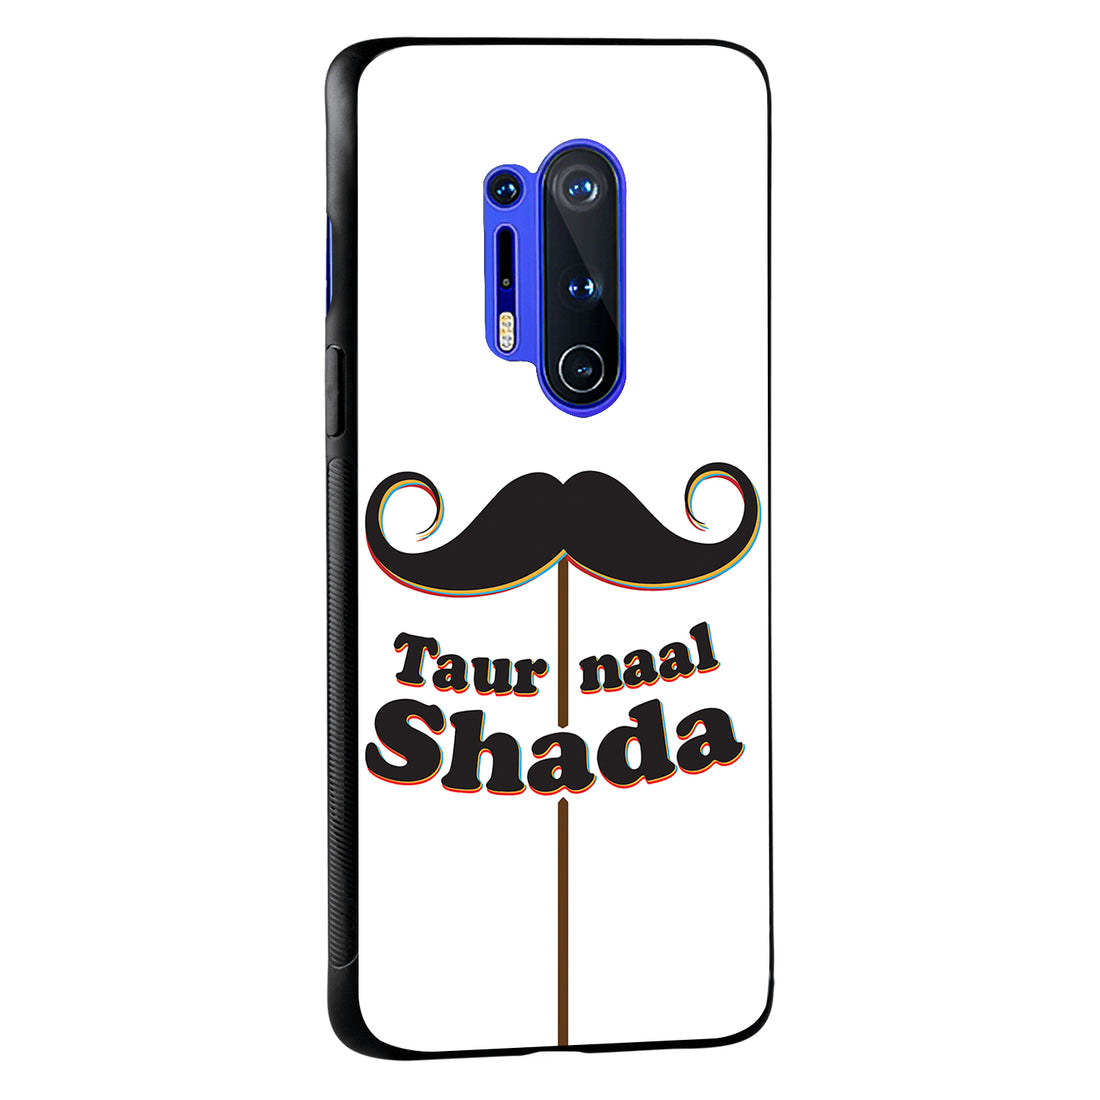 Taur Naal Shada Motivational Quotes Oneplus 8 Pro Back Case